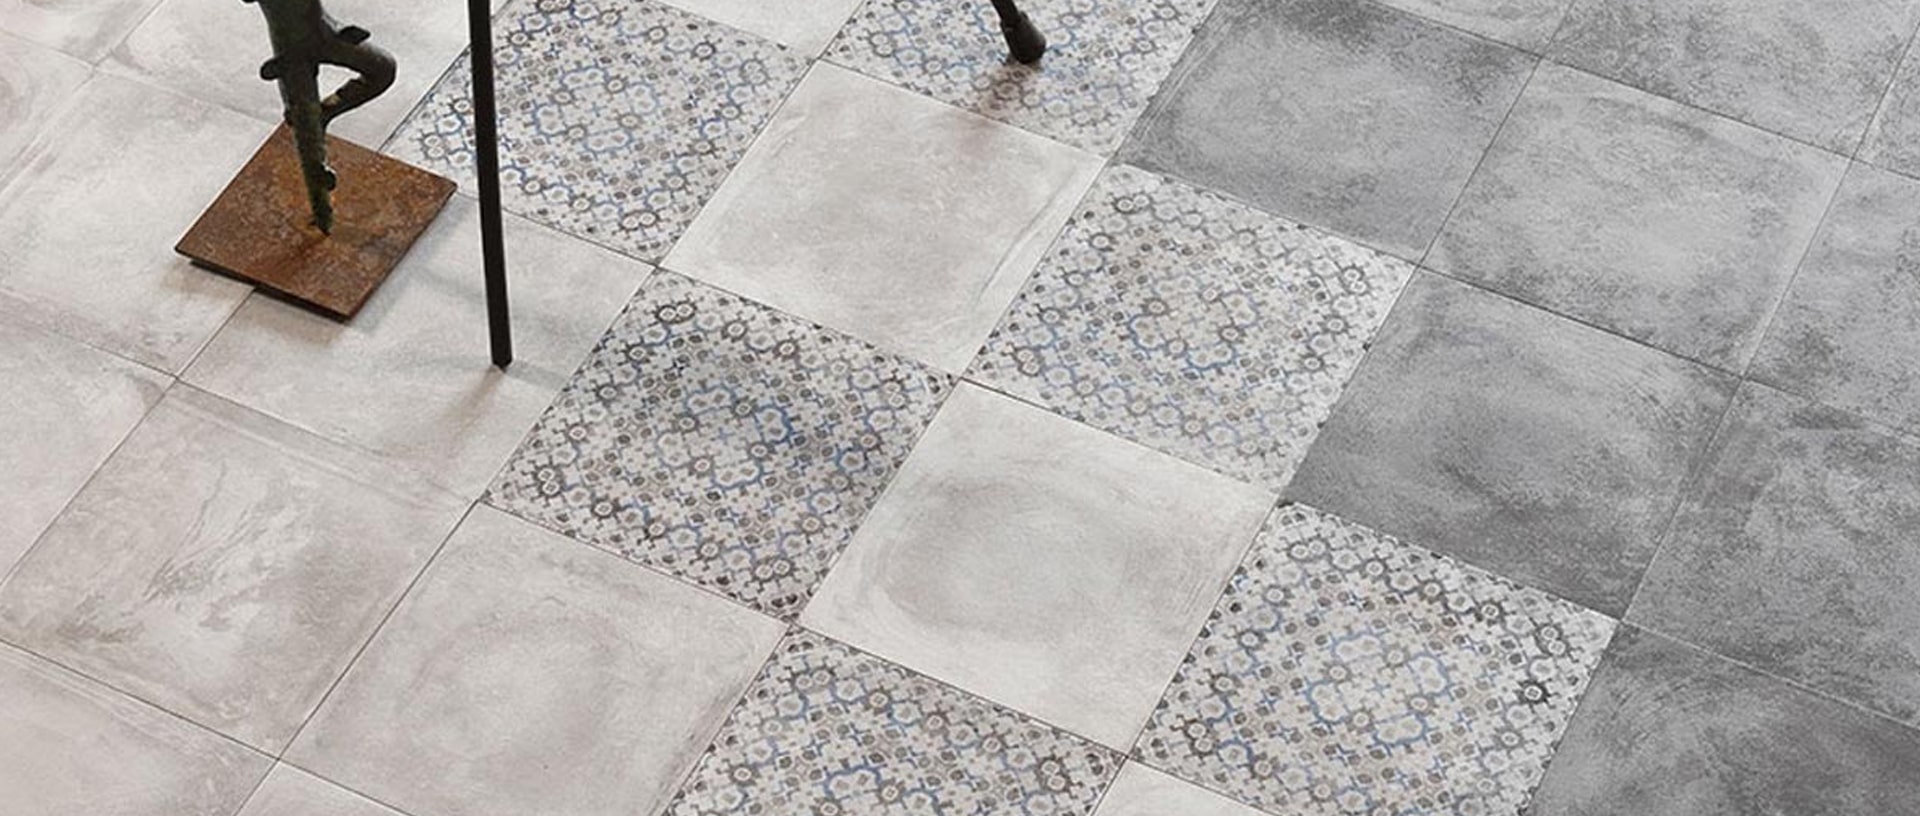 Impart timber feel to your floor with these tiles post thumbnail image